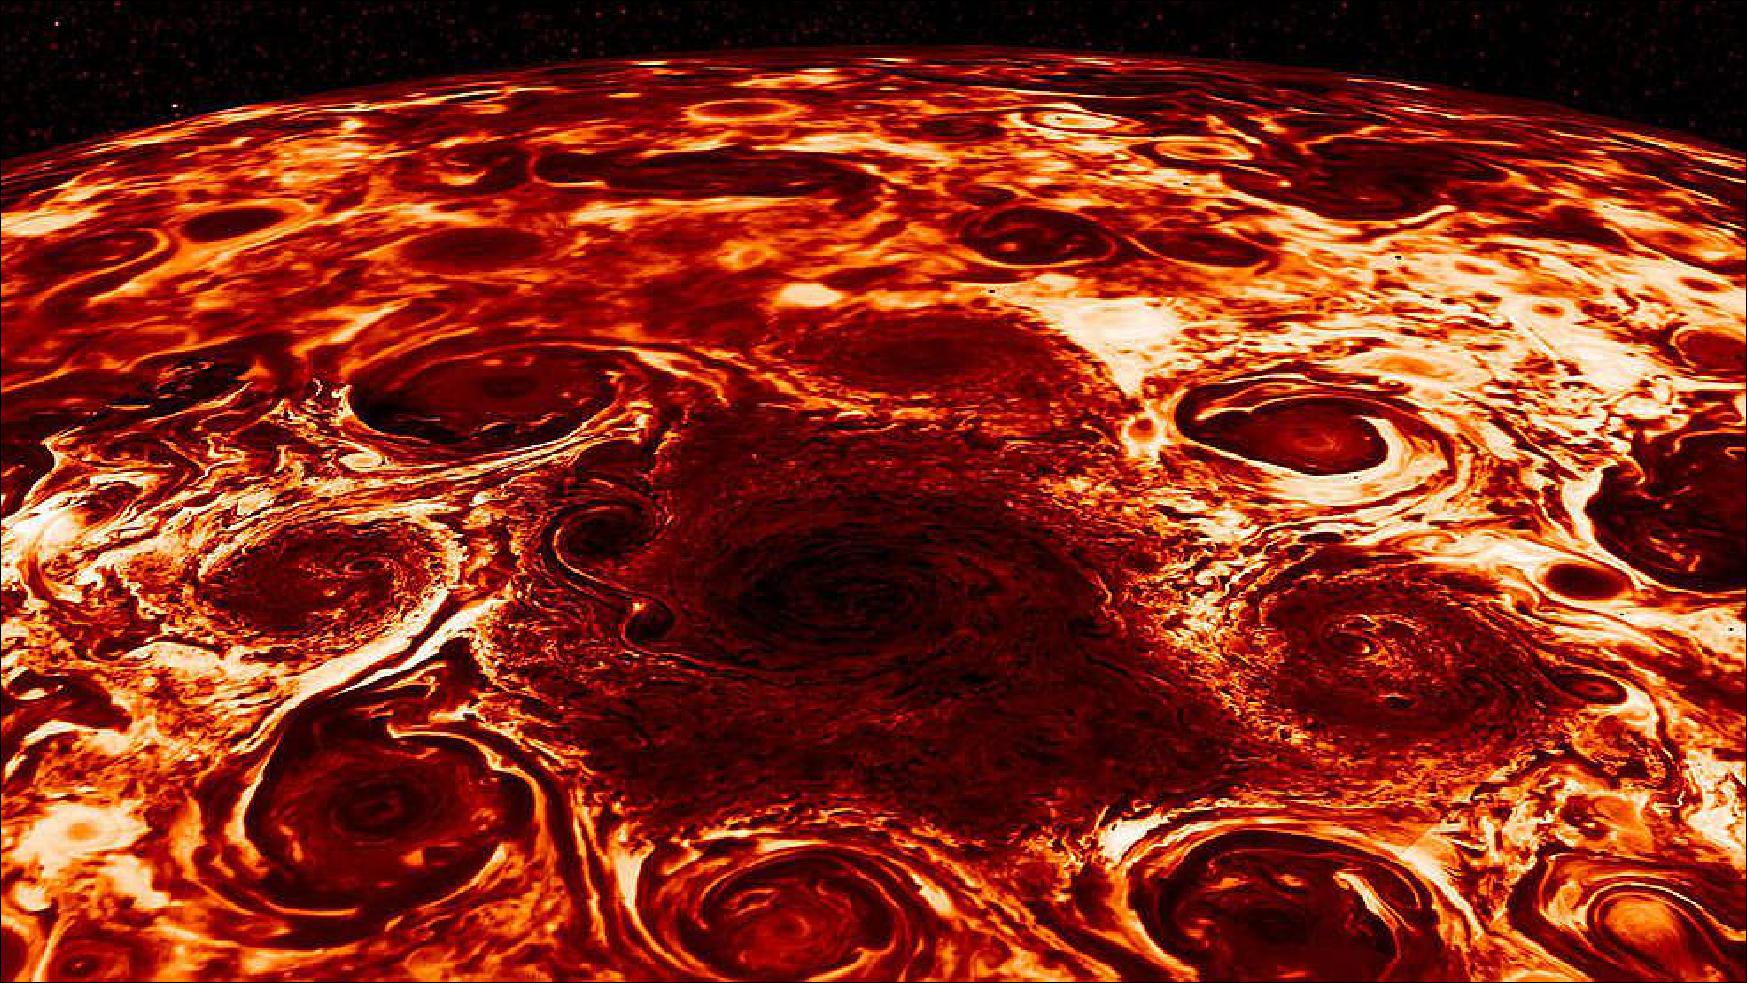 Figure 43: This composite image, derived from data collected by the Jovian Infrared Auroral Mapper (JIRAM) instrument aboard NASA's Juno mission to Jupiter, shows the central cyclone at the planet's north pole and the eight cyclones that encircle it (image credits: NASA/JPL-Caltech/SwRI/ASI/INAF/JIRAM)